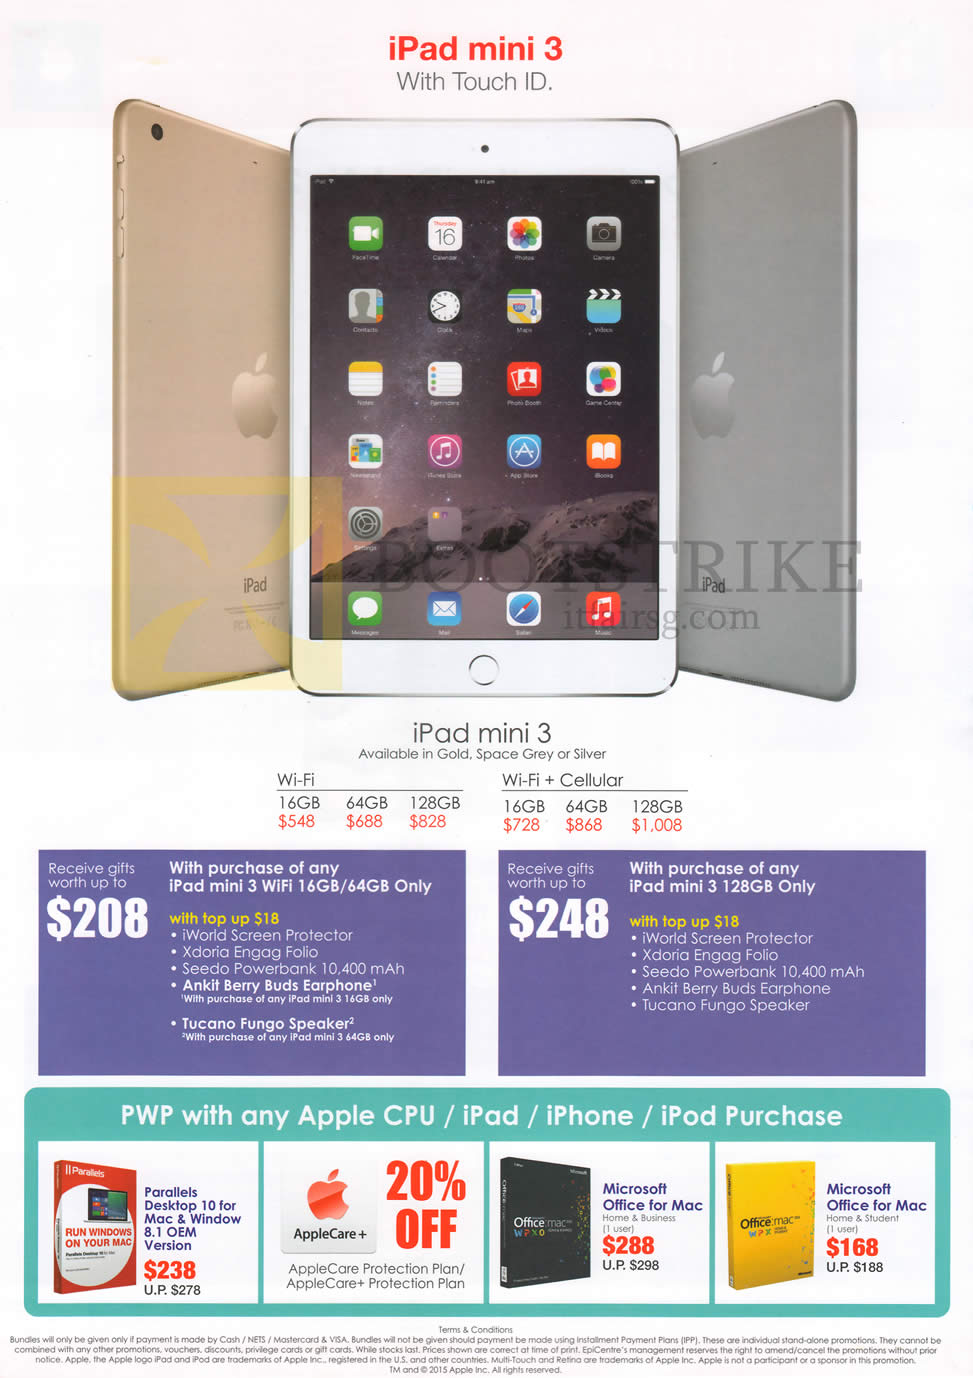 PC SHOW 2015 price list image brochure of EpiCentre IPad Mini 3, Purchase With Purchase, Parallels 10 For Mac N Window 8.1 OEM Version, AppleCare Plus Plan, Microsoft Office For Mac